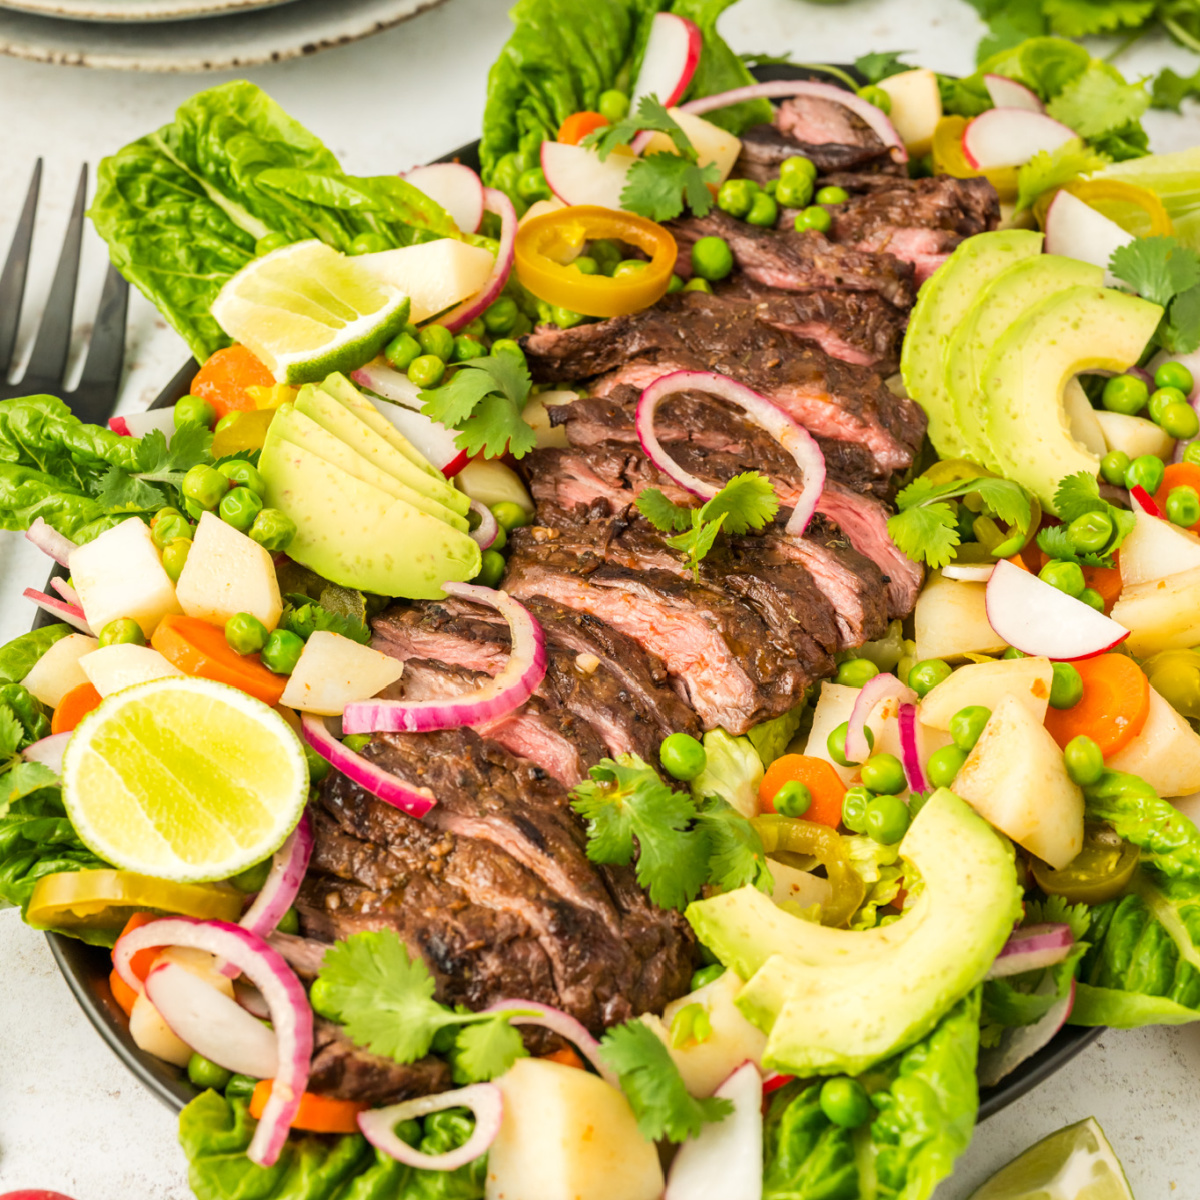 Sliced flank steak on a plate surrounded by vegetables.